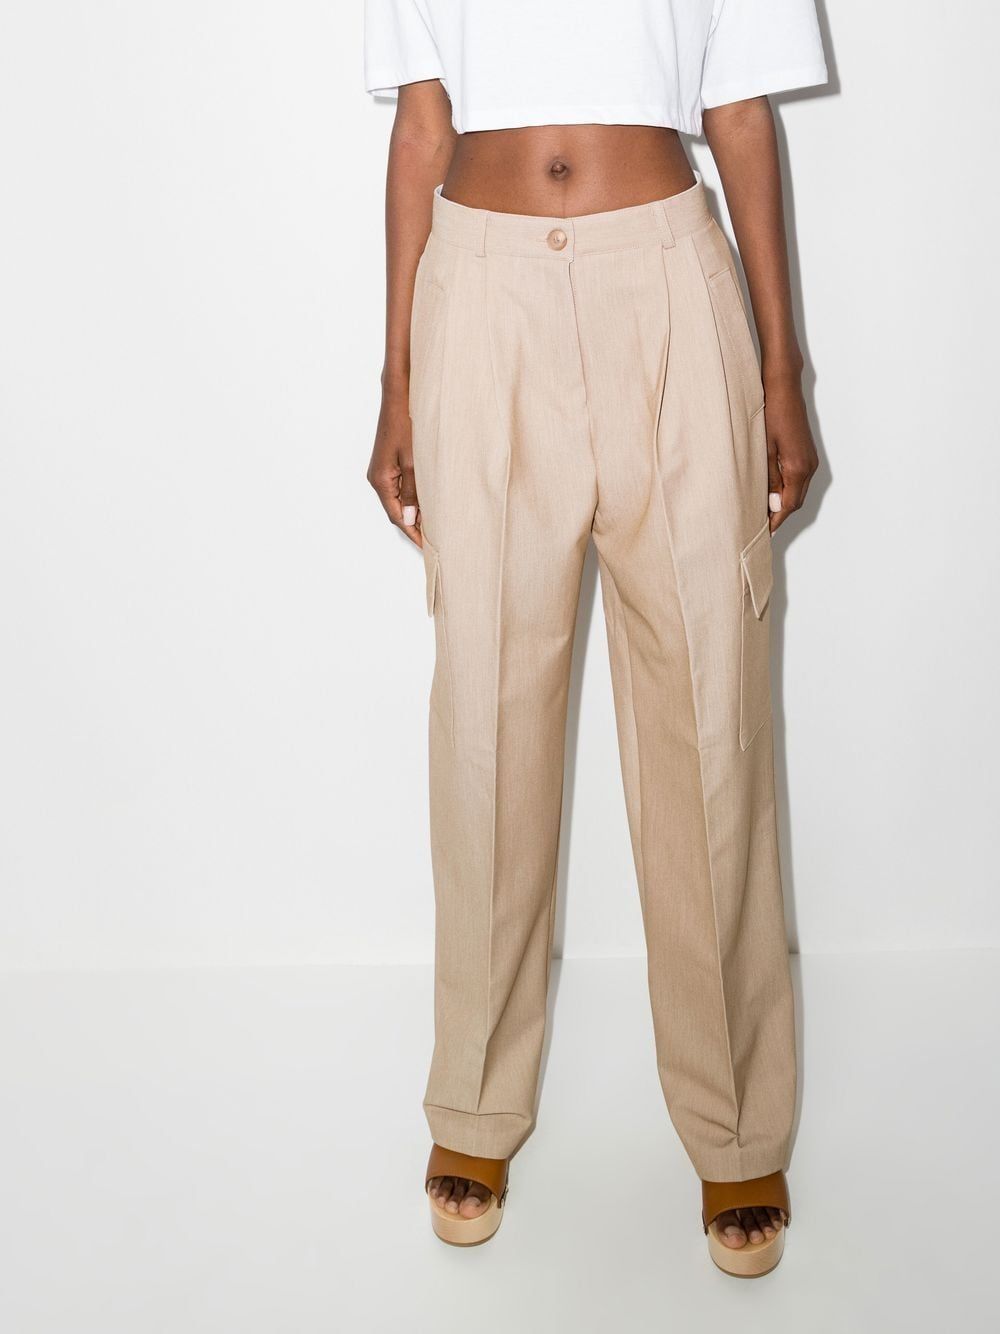 Clothes and Apparel :: Pants :: Trousers :: 5.11 - Stryke Pant Womens Khaki